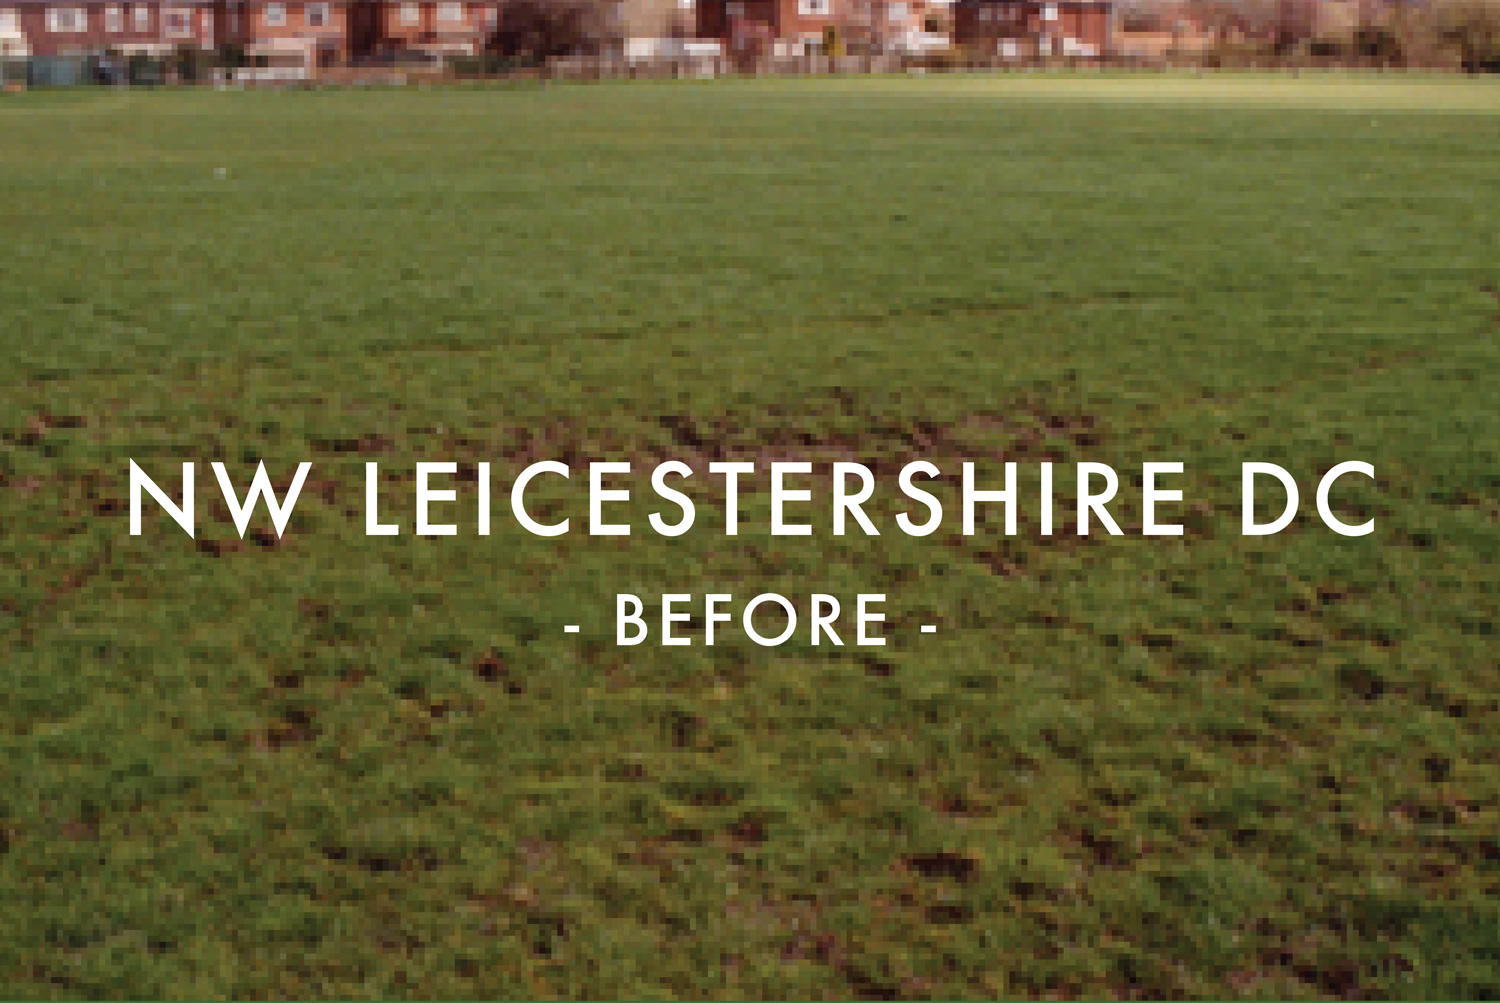 NW Leicestershire - Before Drainage